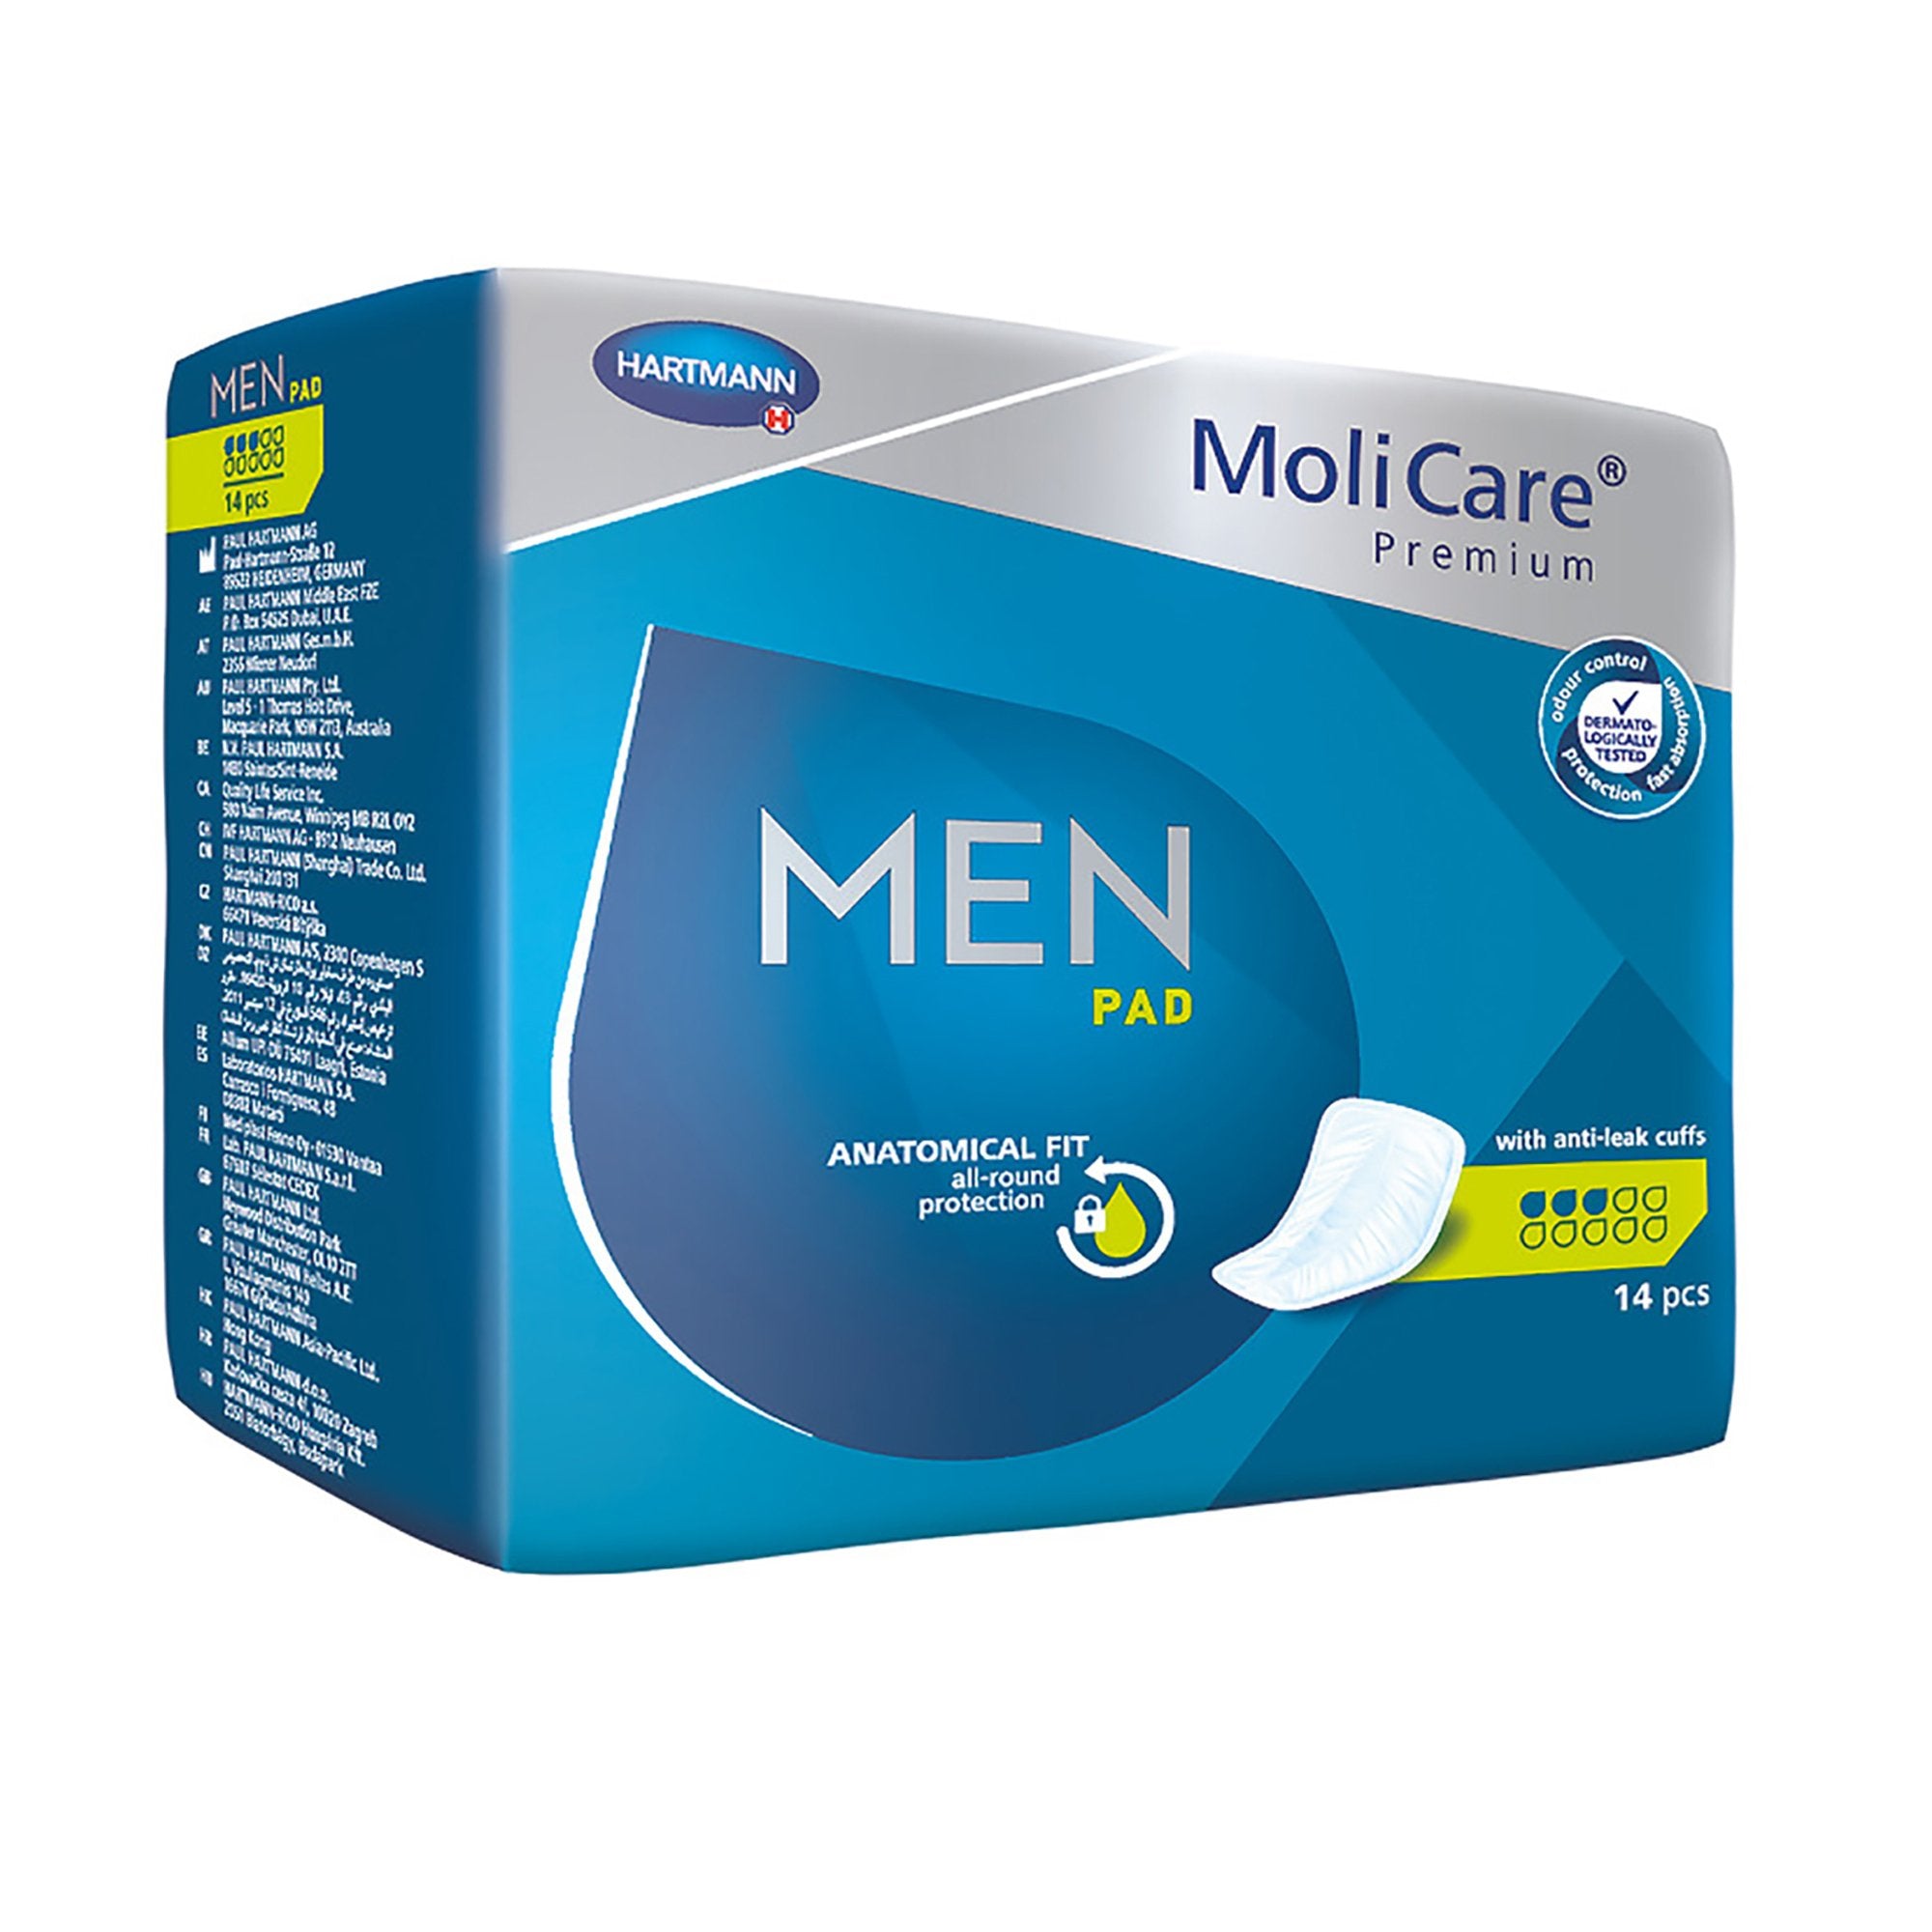 Bladder Control Pad MoliCare® Premium Men 7 X 10 Inch Light Absorbency Polymer Core One Size Fits Most